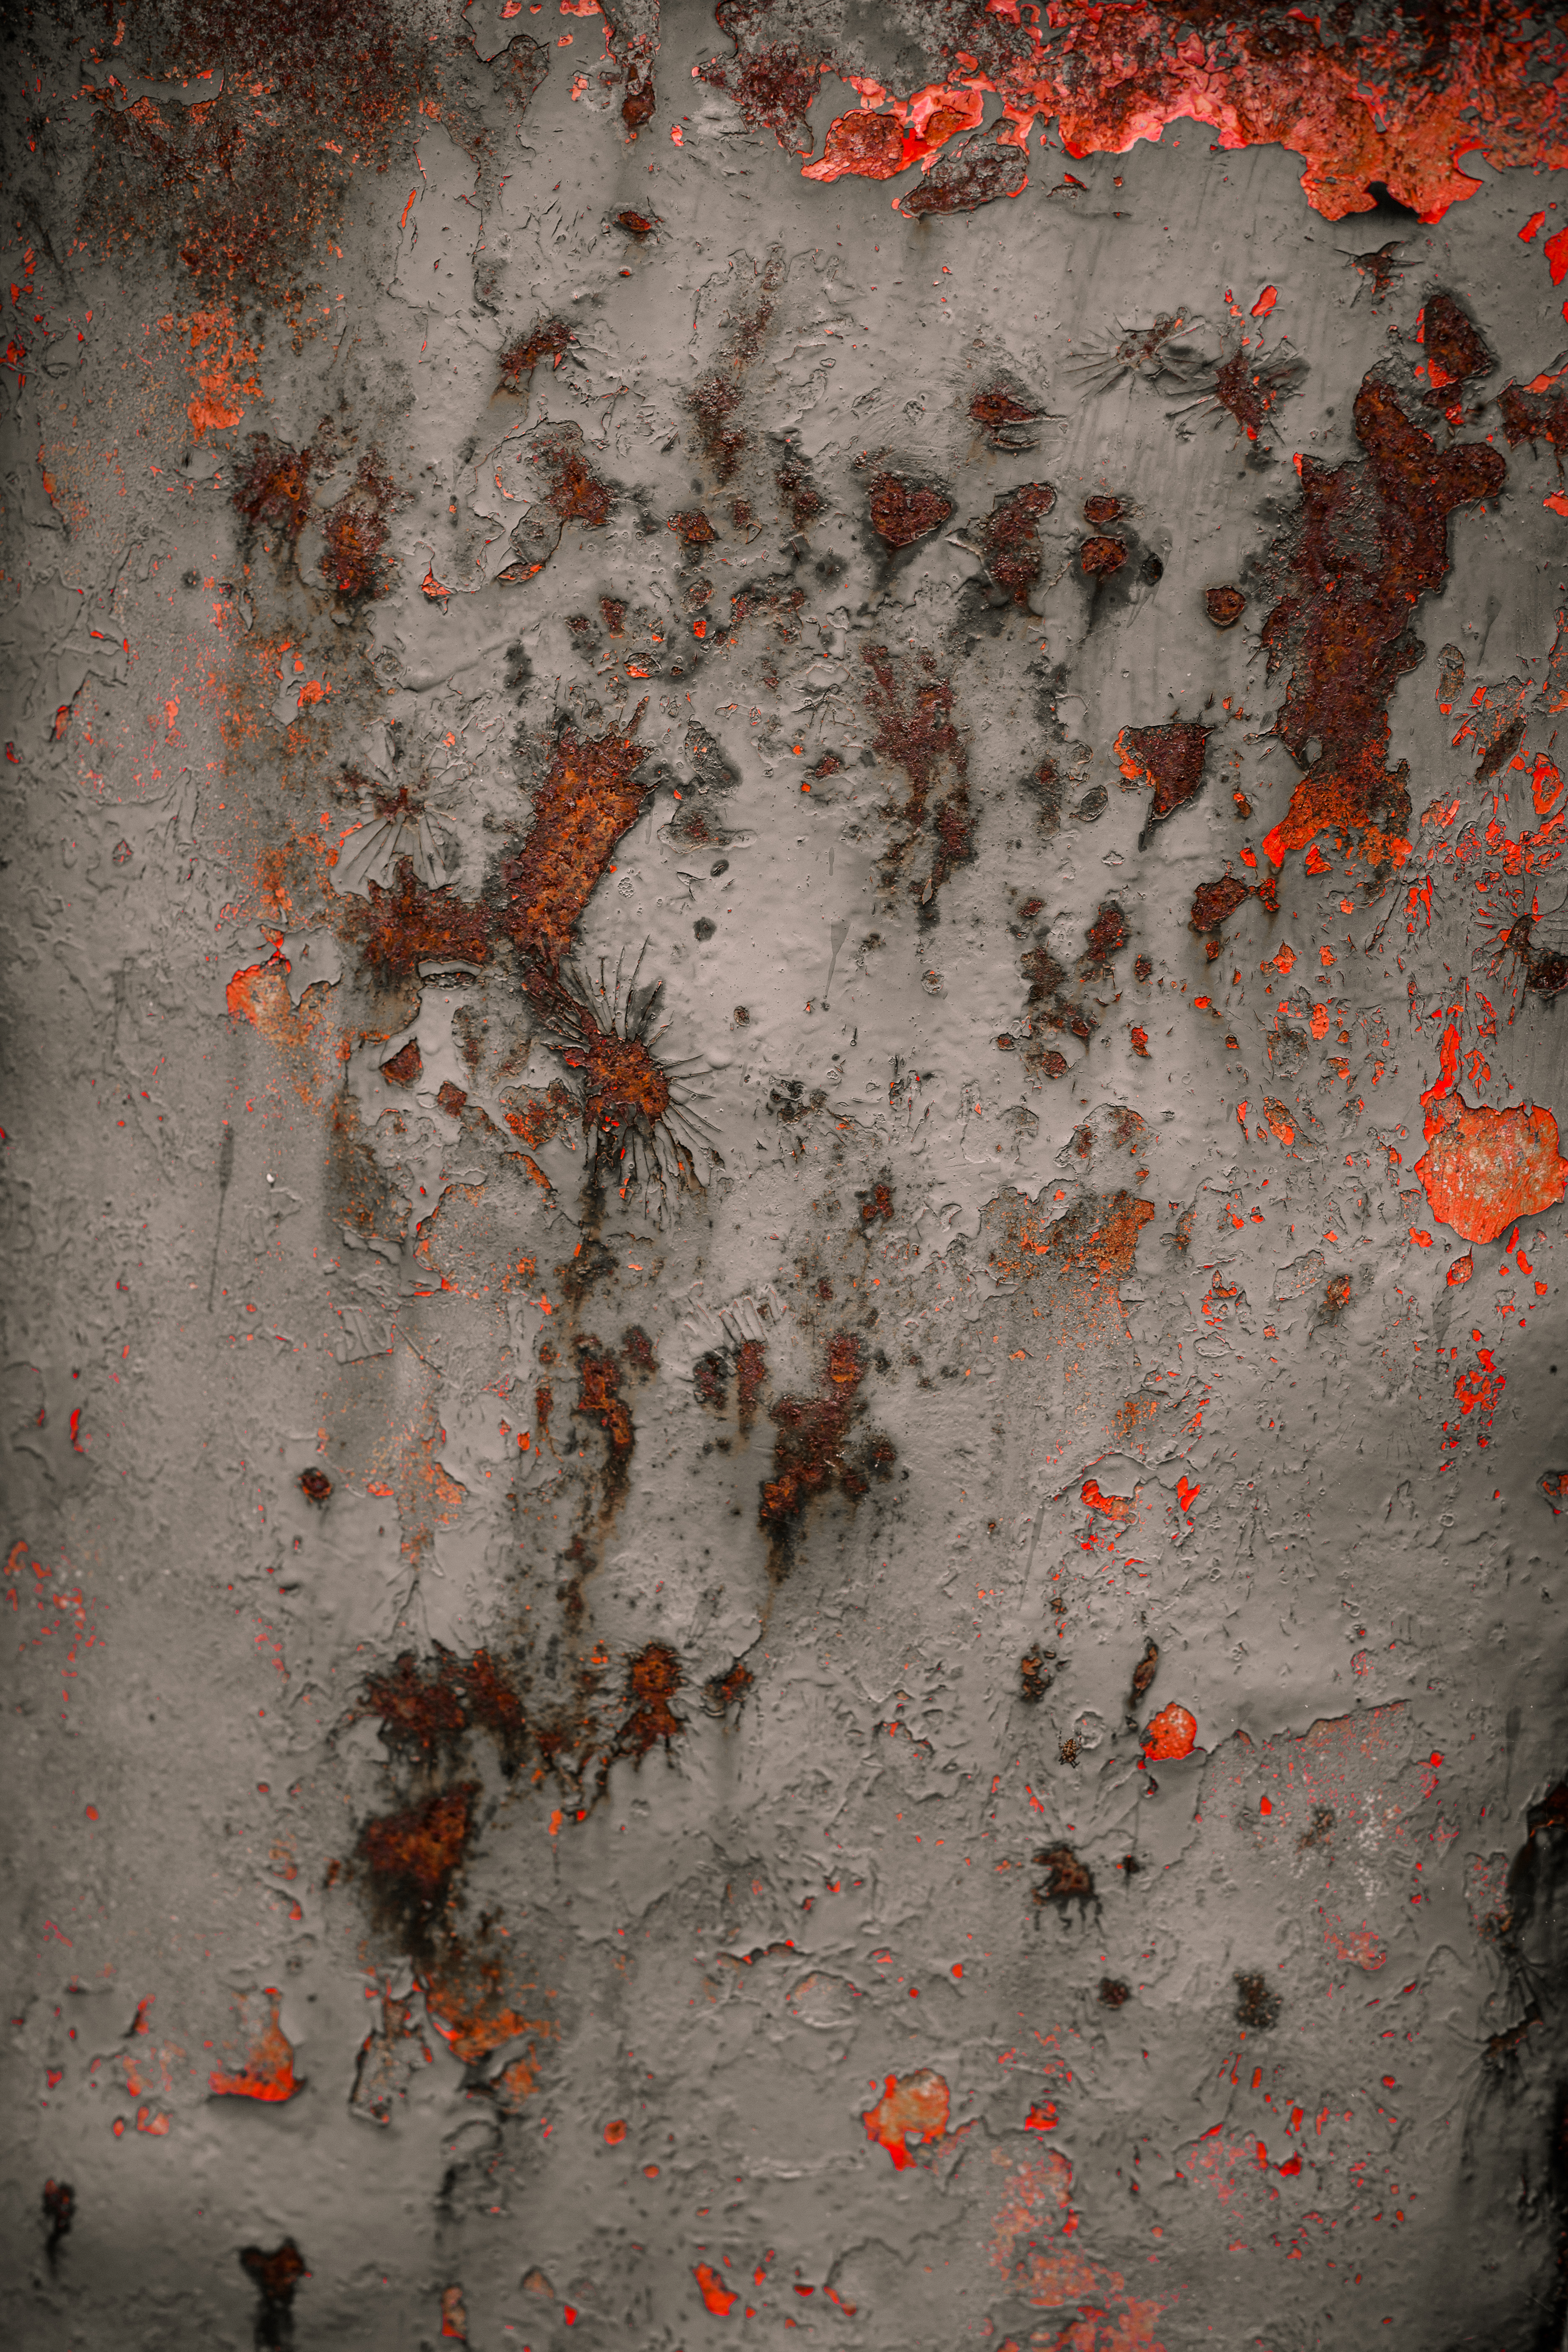 Rusted red metal overlay photo